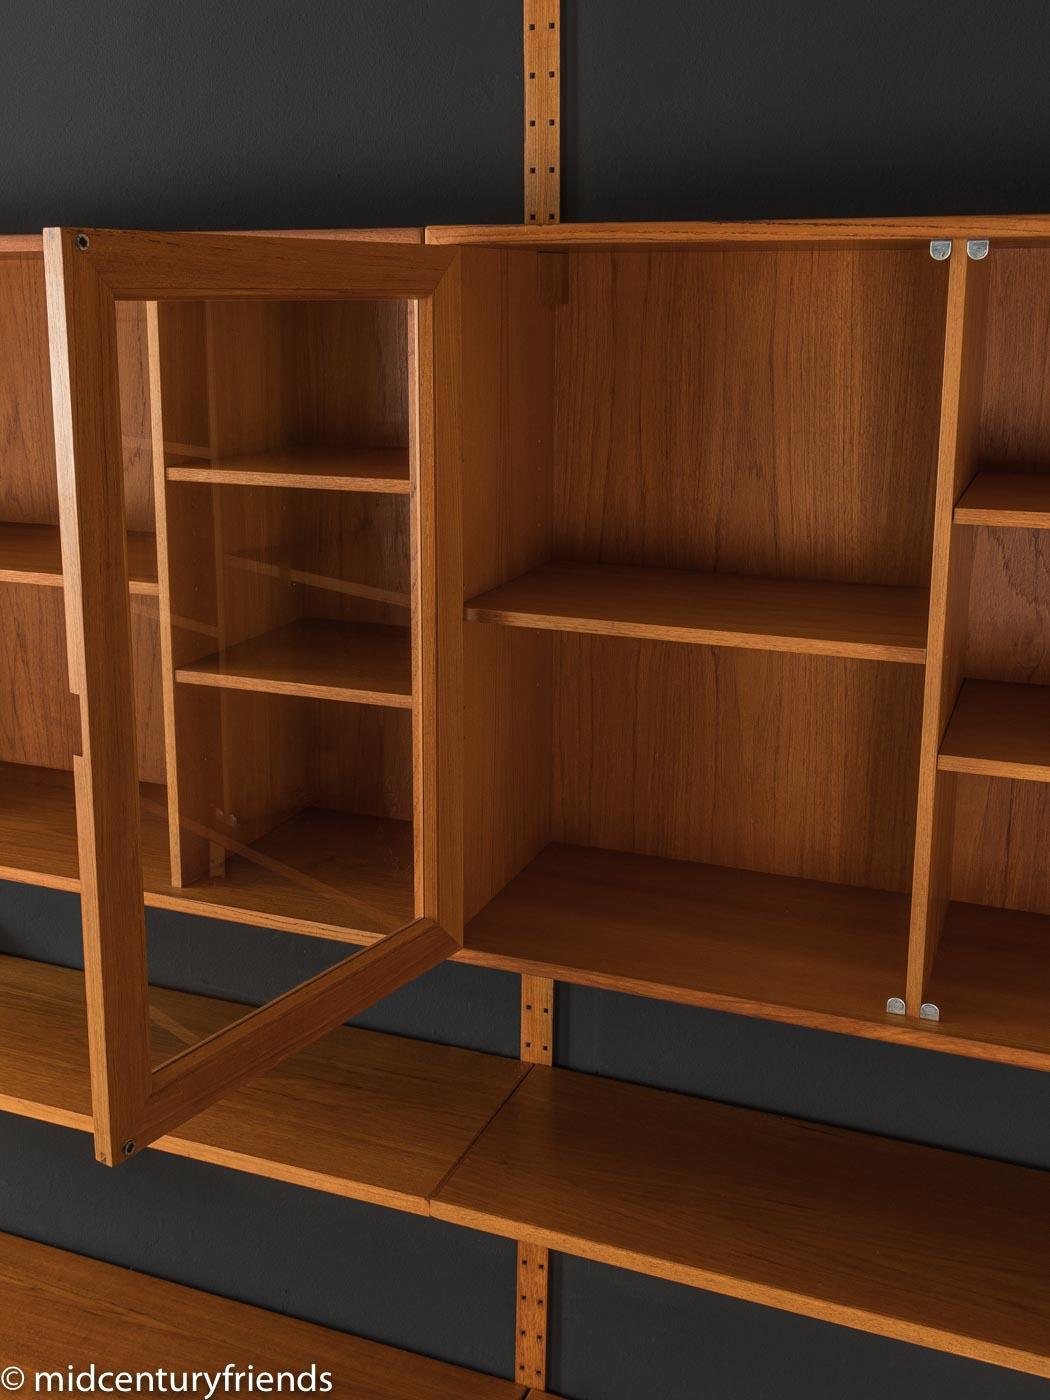 60s Wall Shelving System by HG Furniture, with Showcase, Magazine Rack, Drawers 1